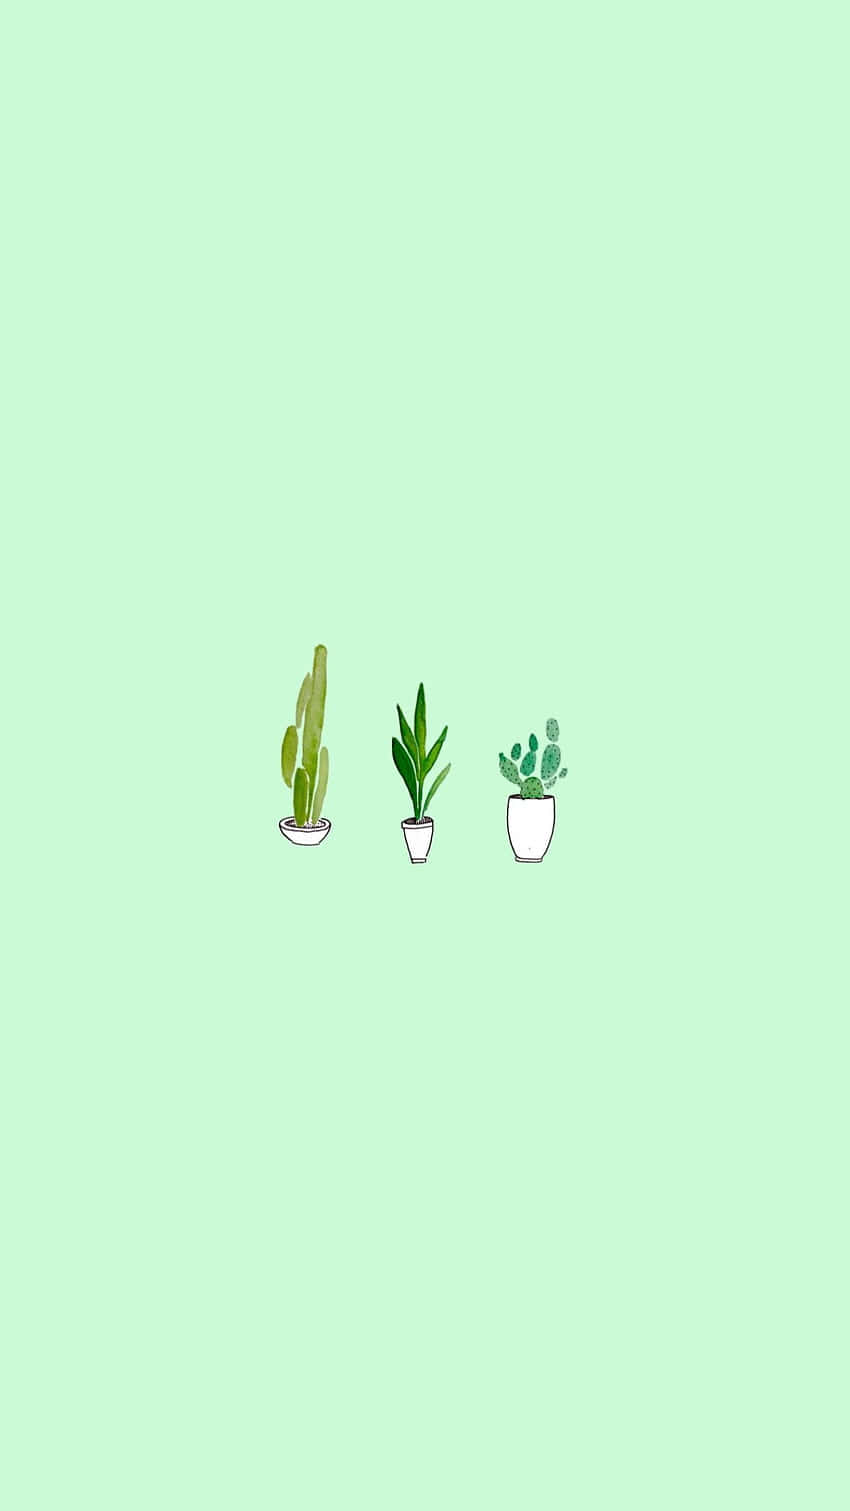 Cute Sage Green Cactus And Two House Plants Wallpaper